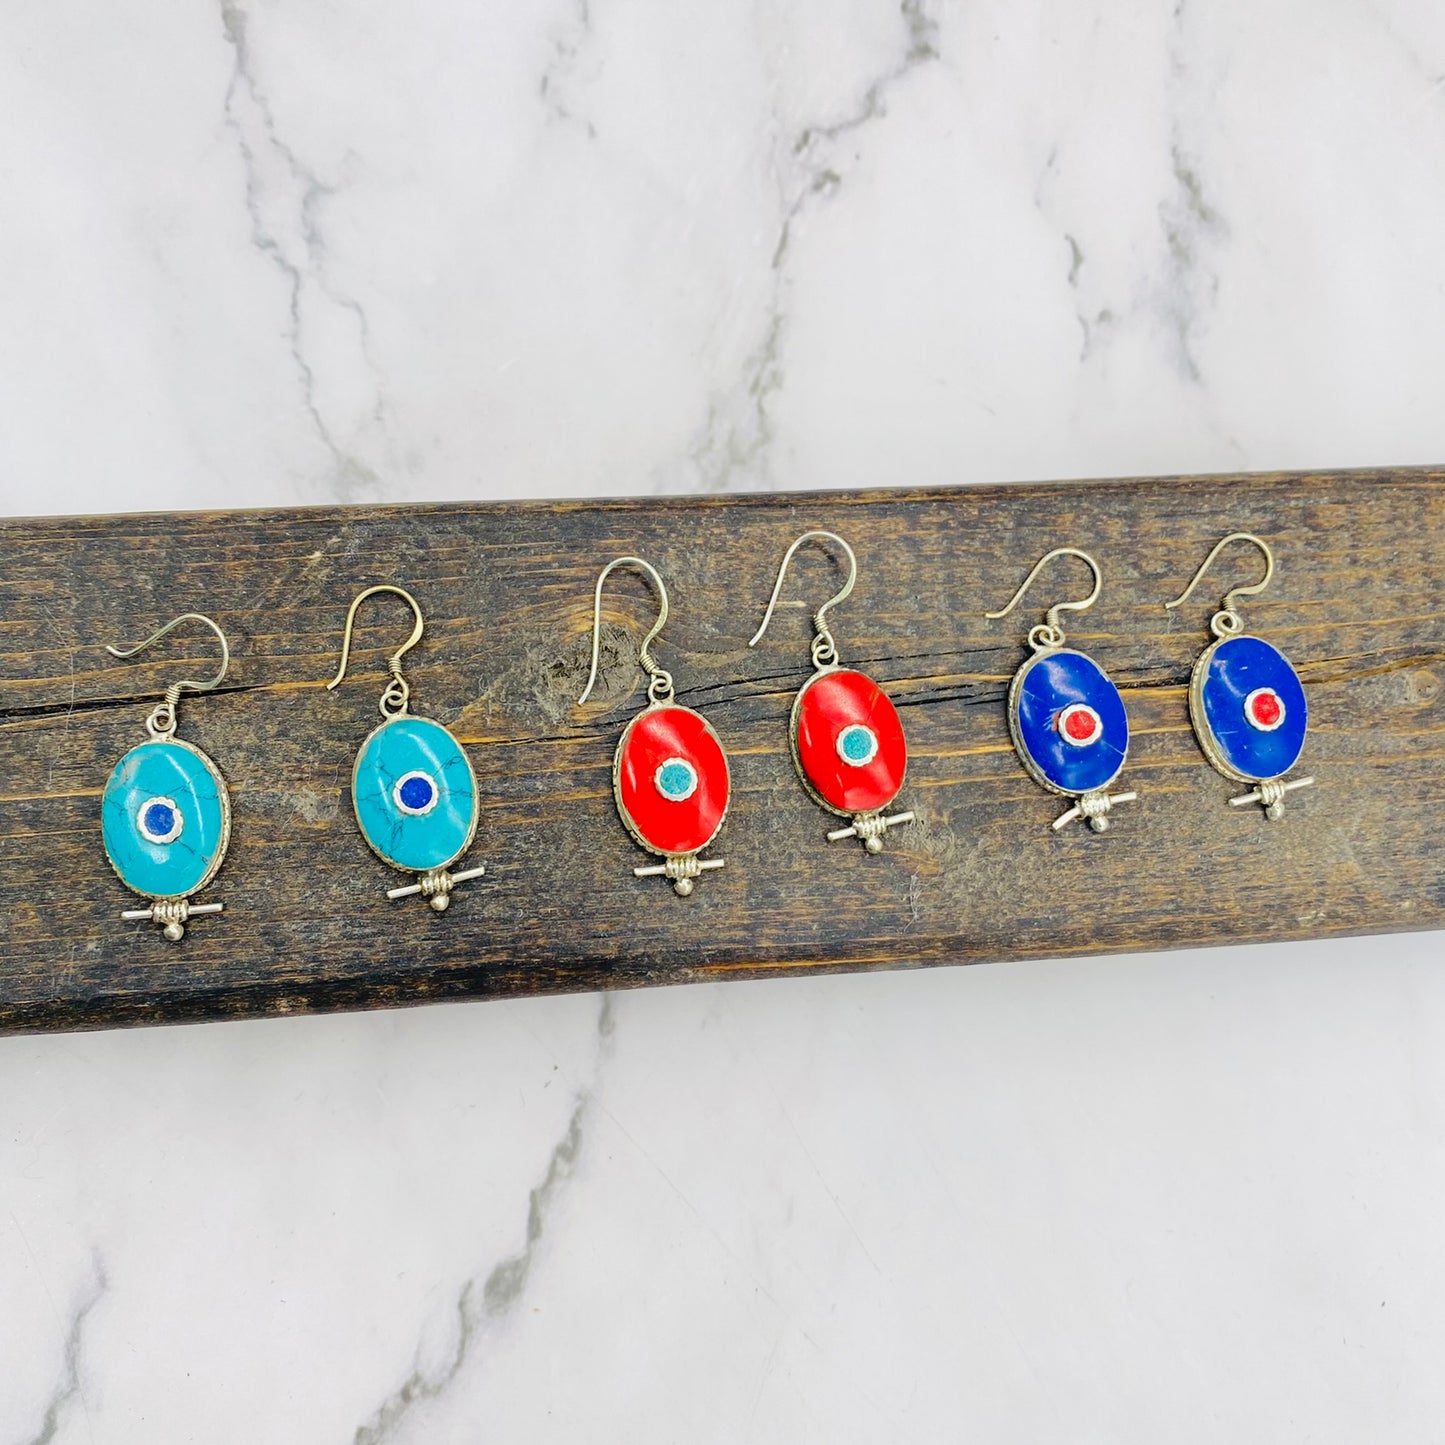 Handmade Gemstone Earring from Nepal, Bohemian Jewelry, Oval Shaped Earring, Gift for Her, Turquoise/Coral/Lapis Lazuli Earring from Nepal